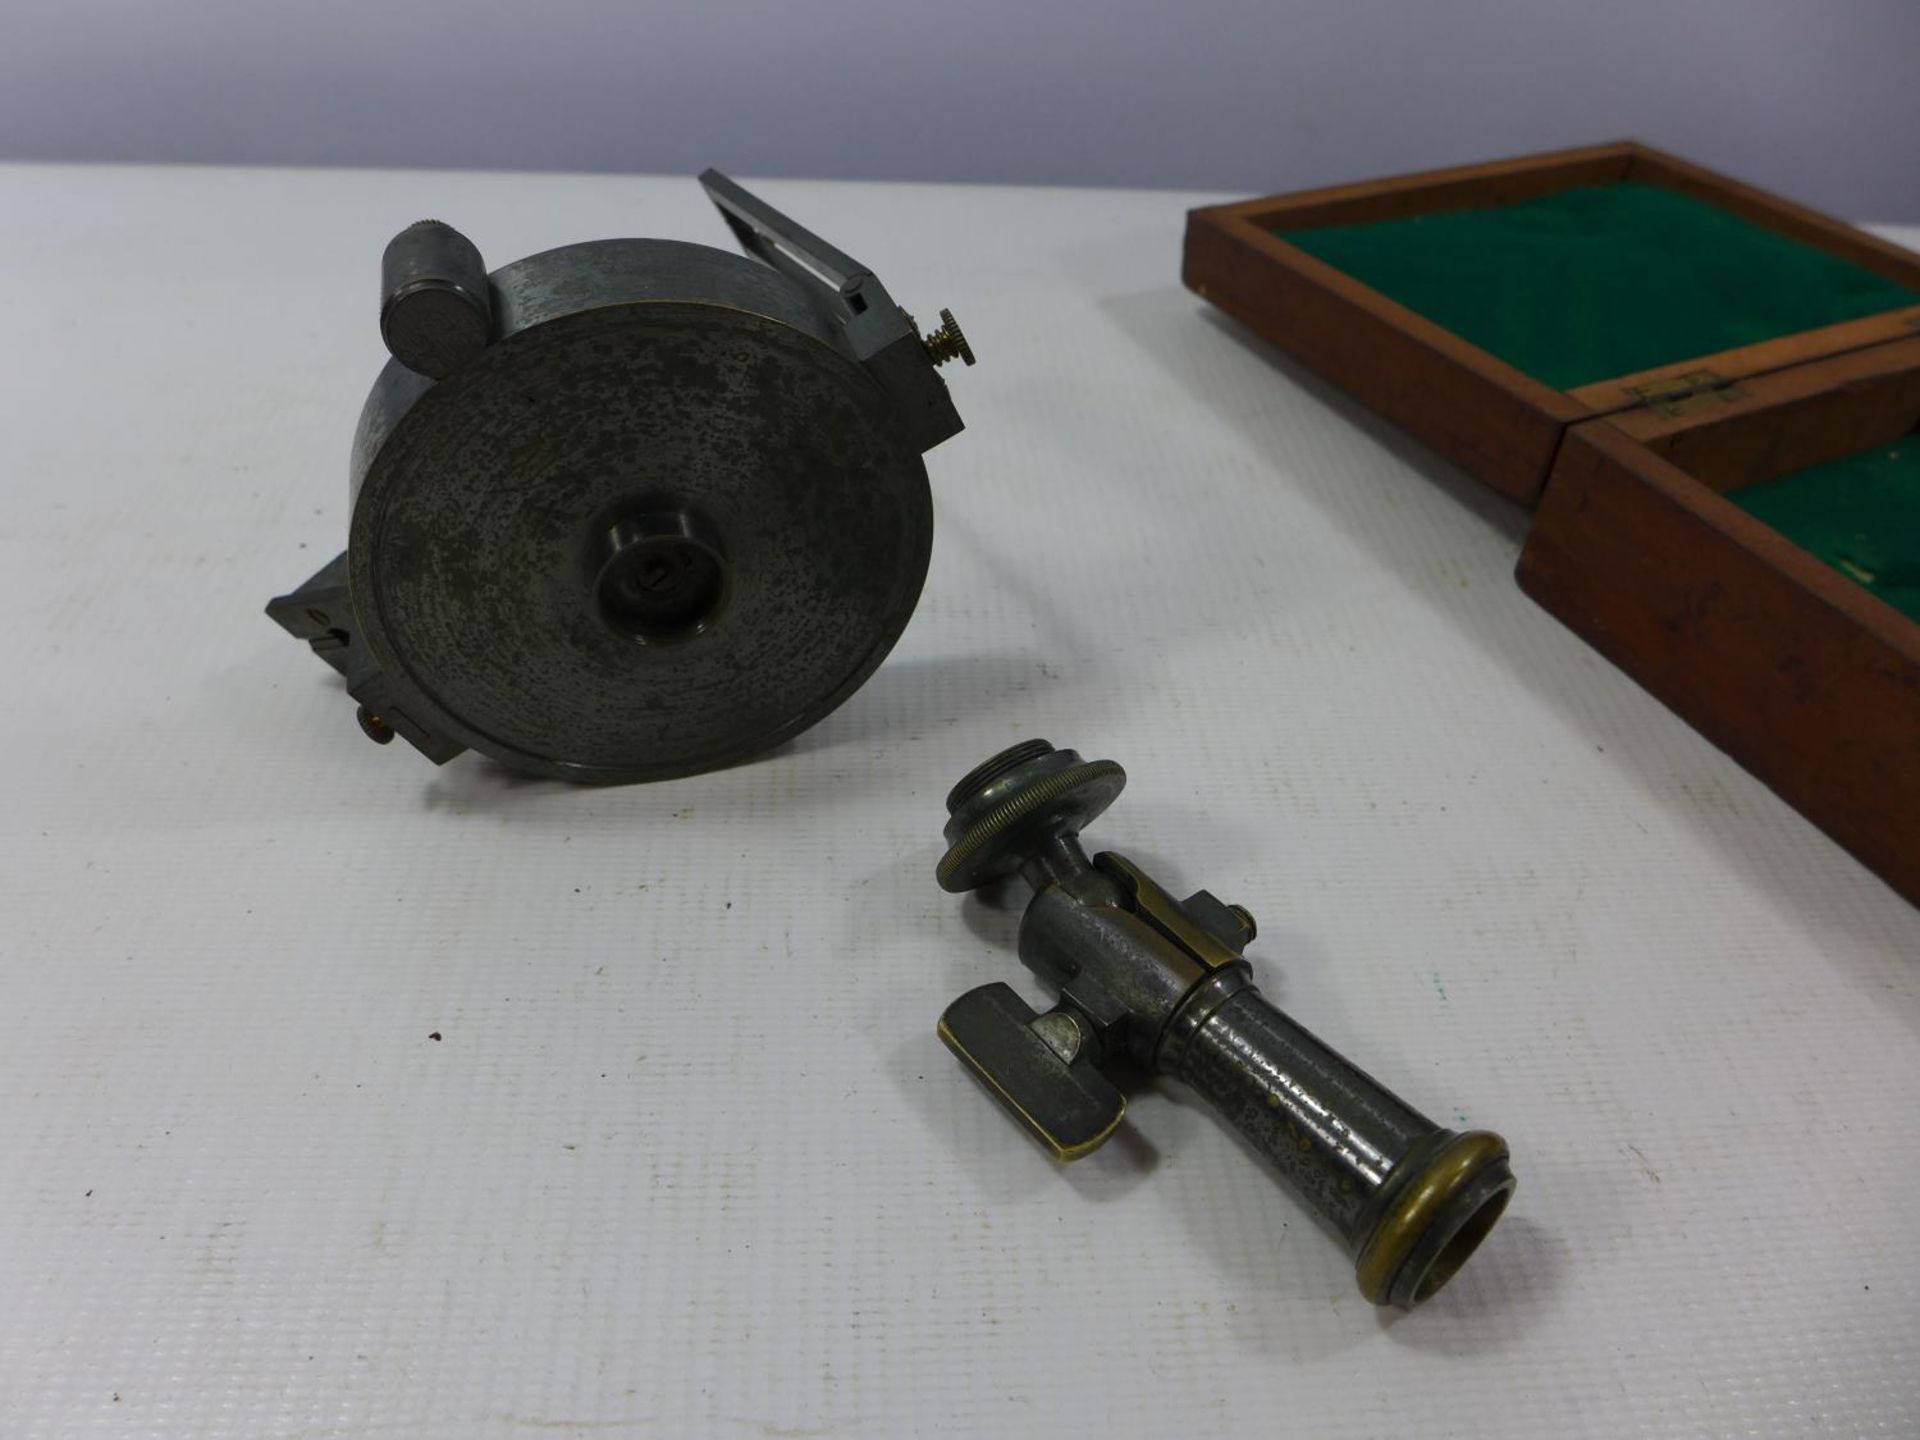 A CASED COMPASS AND STAND ATTACHMENTS, FACE DIAMETER 8CM - Image 2 of 3